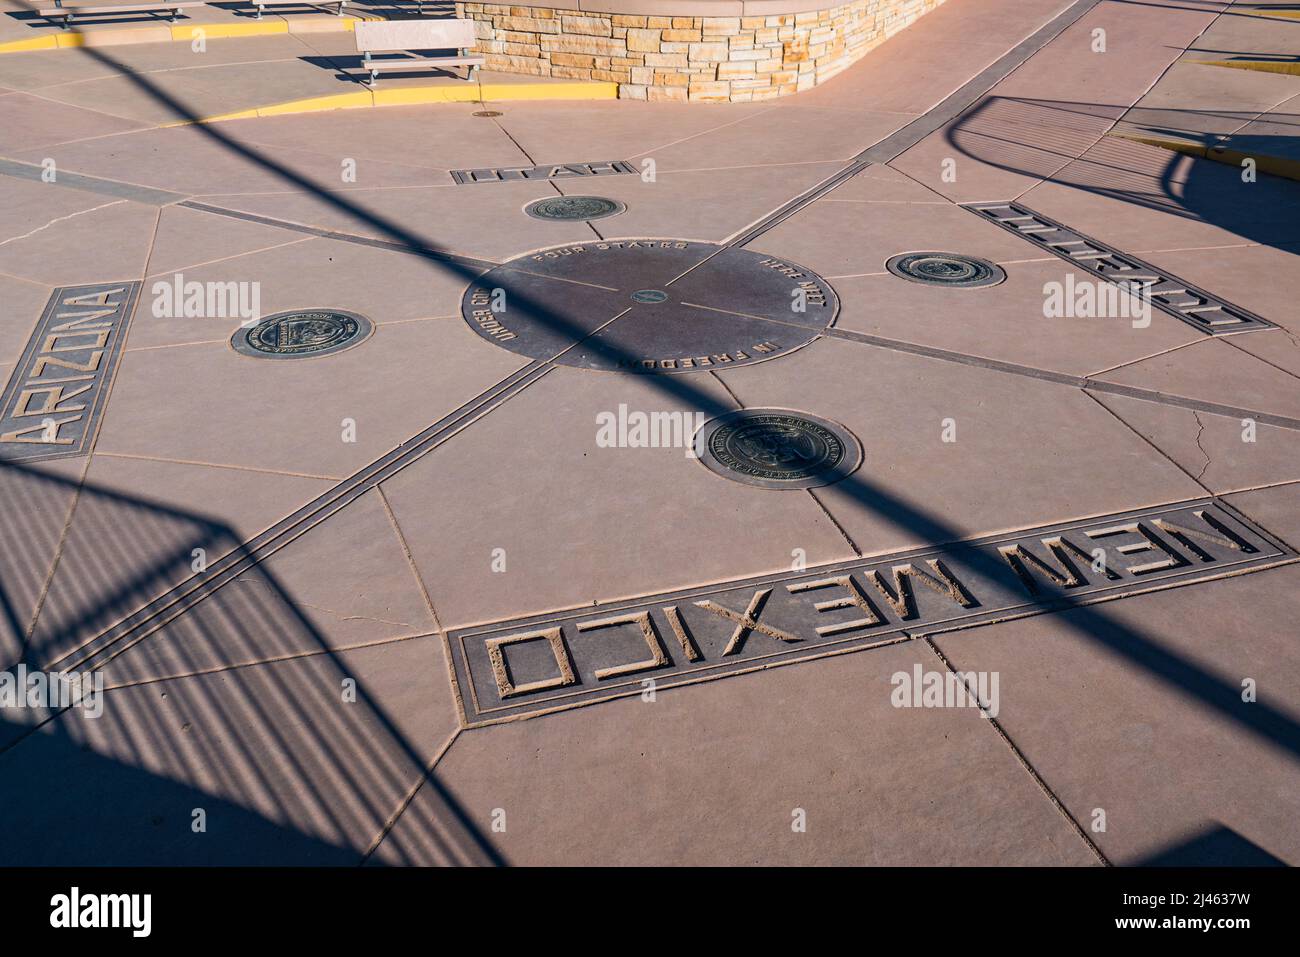 Teec Nos Pos, AZ - October 10,2021:  The Four Corners Monument marks the intersection of the state borders of Colorado, New Mexico, Utah and Arizona Stock Photo